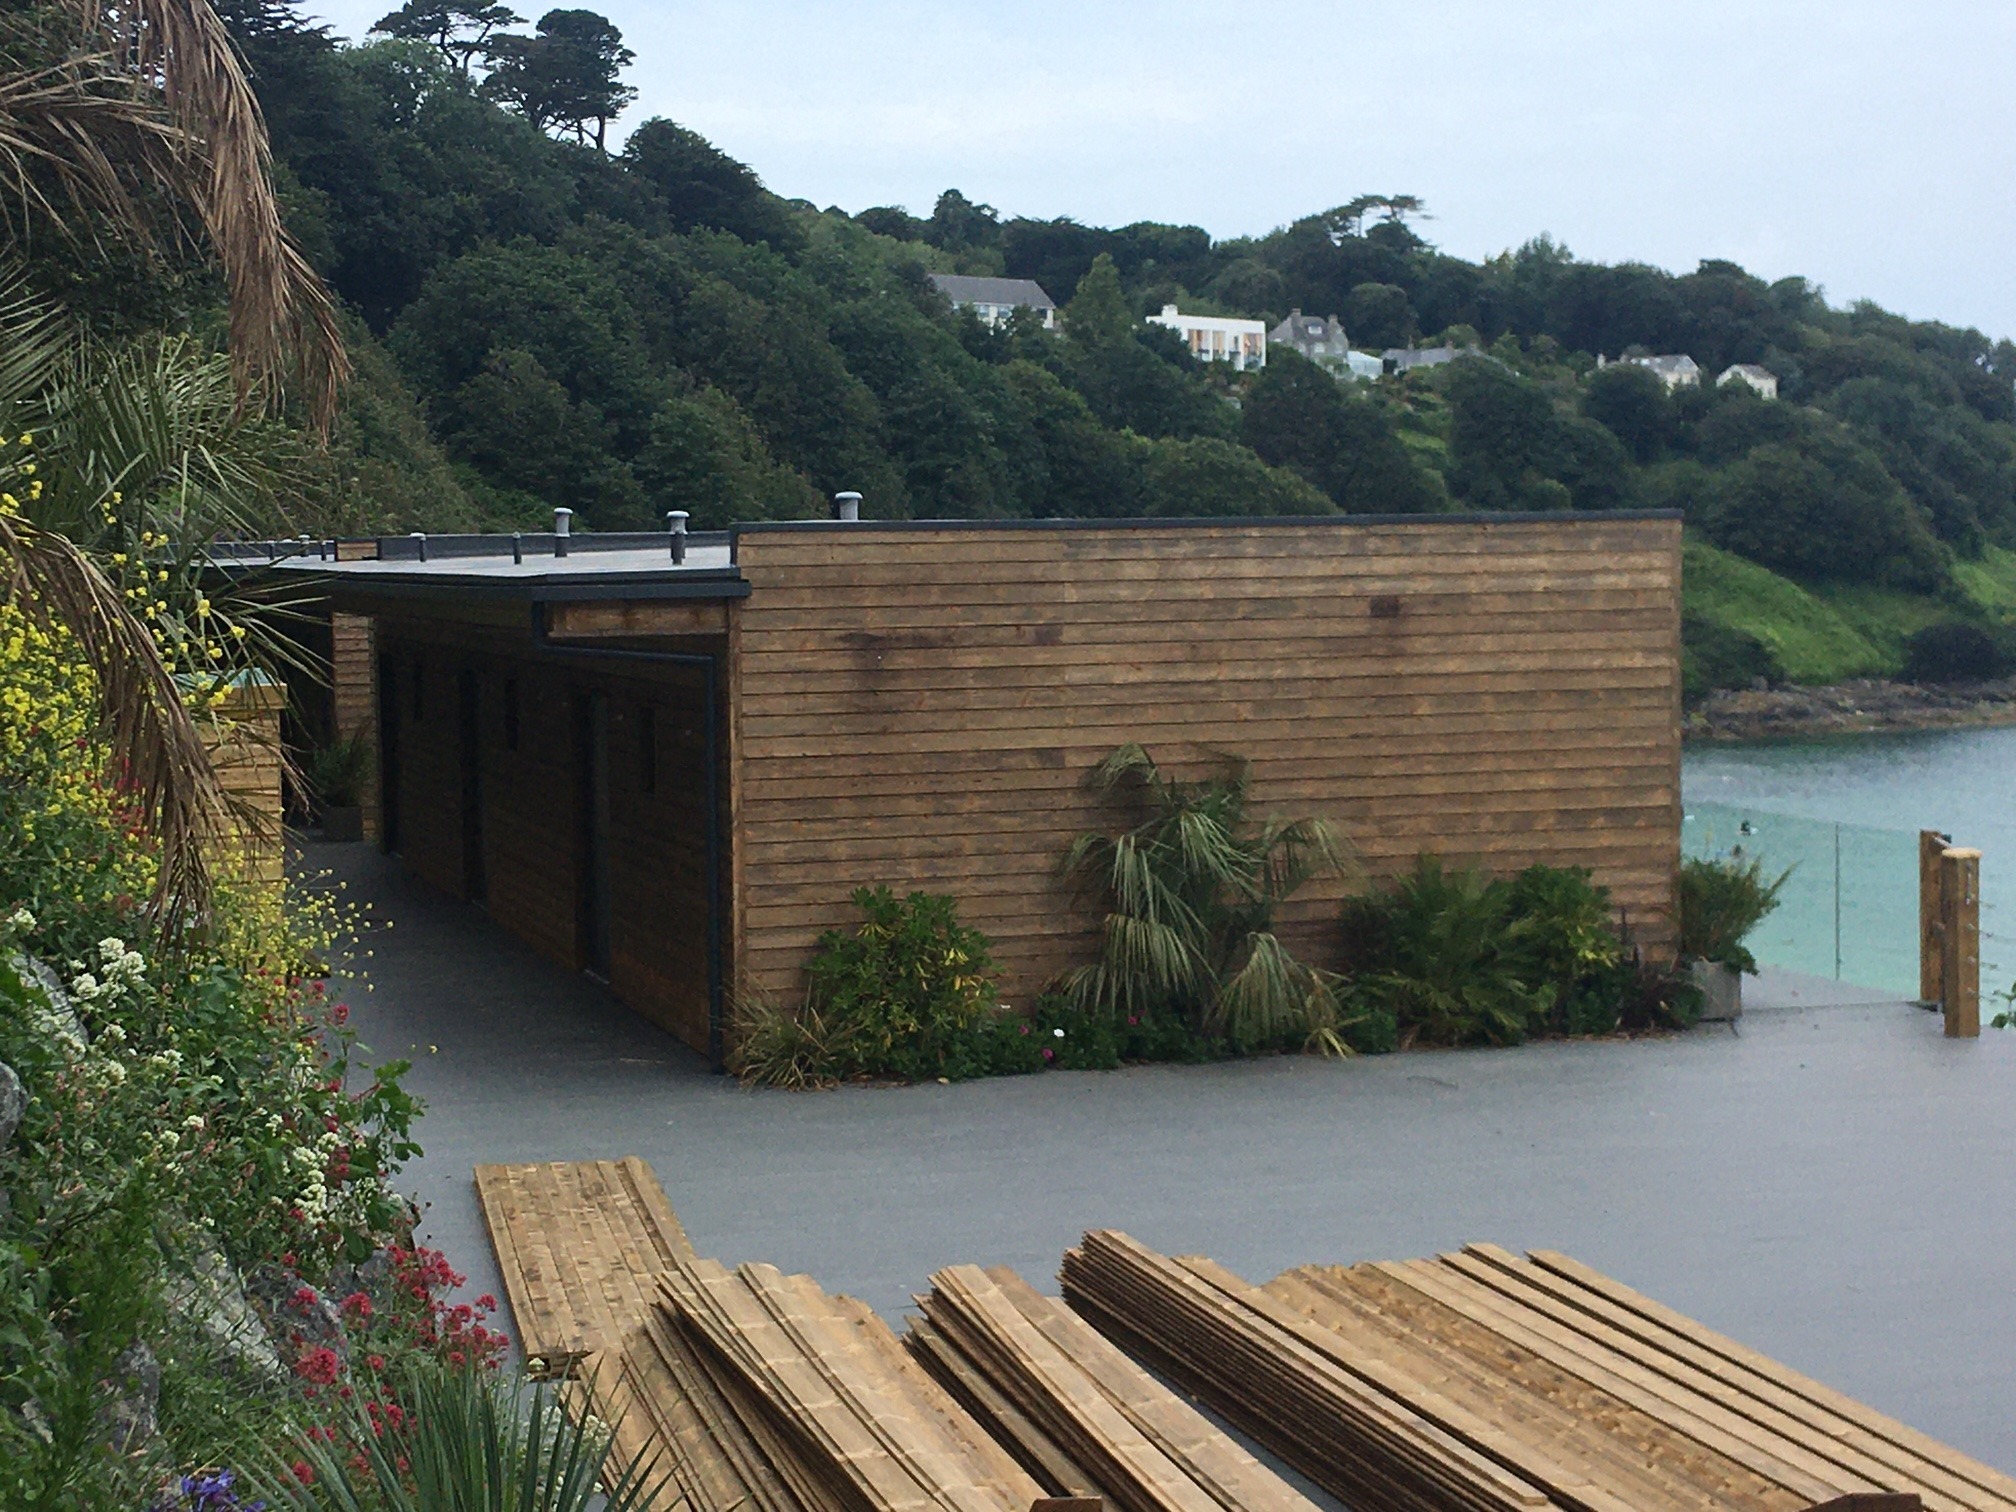 The newly constructed buildings at the Carbis Bay Hotel built without planning permission 